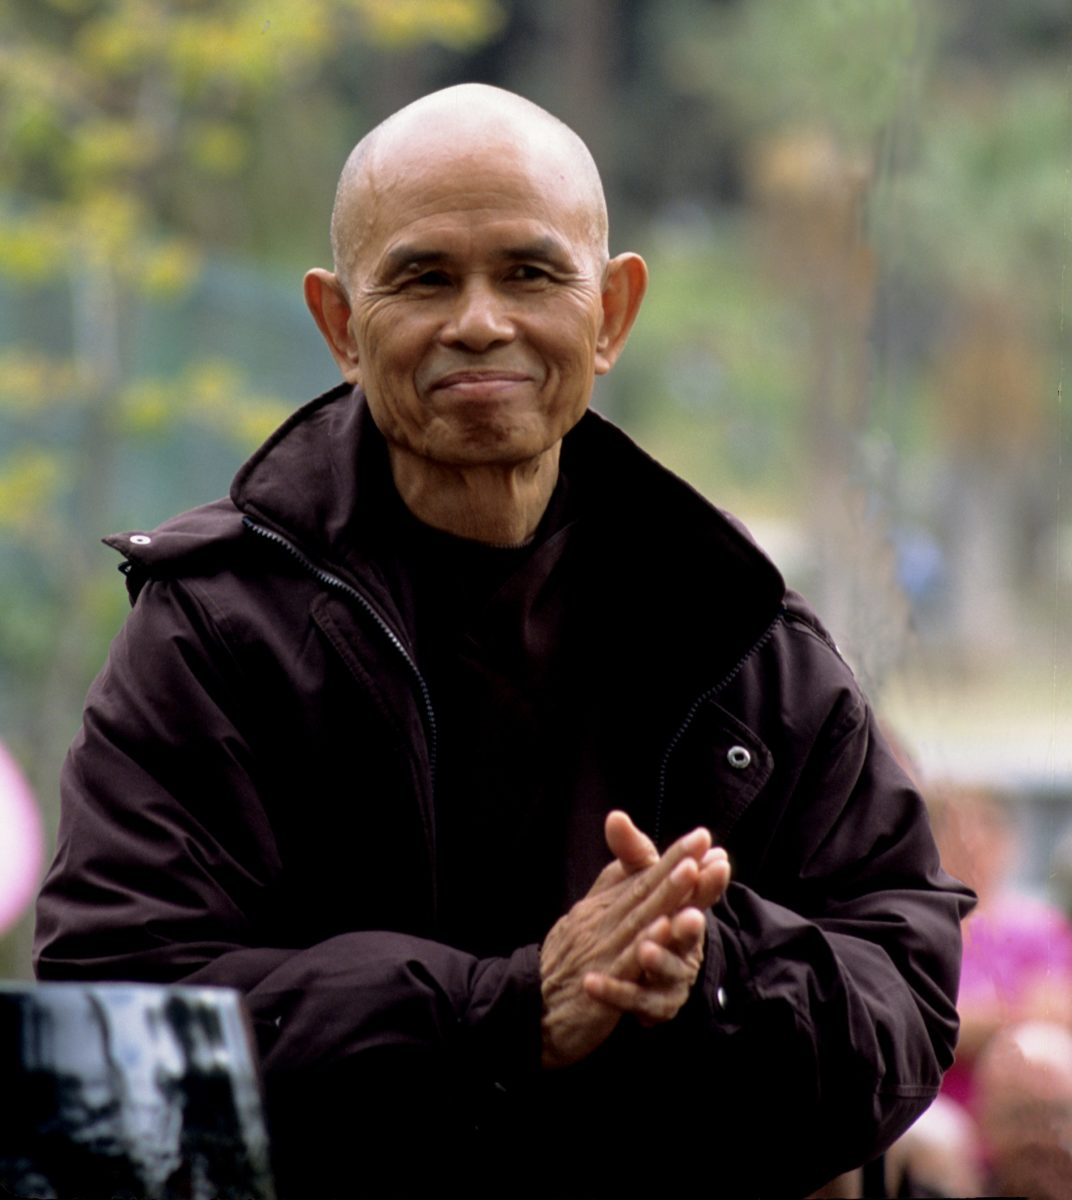 THICH NHAT HANH